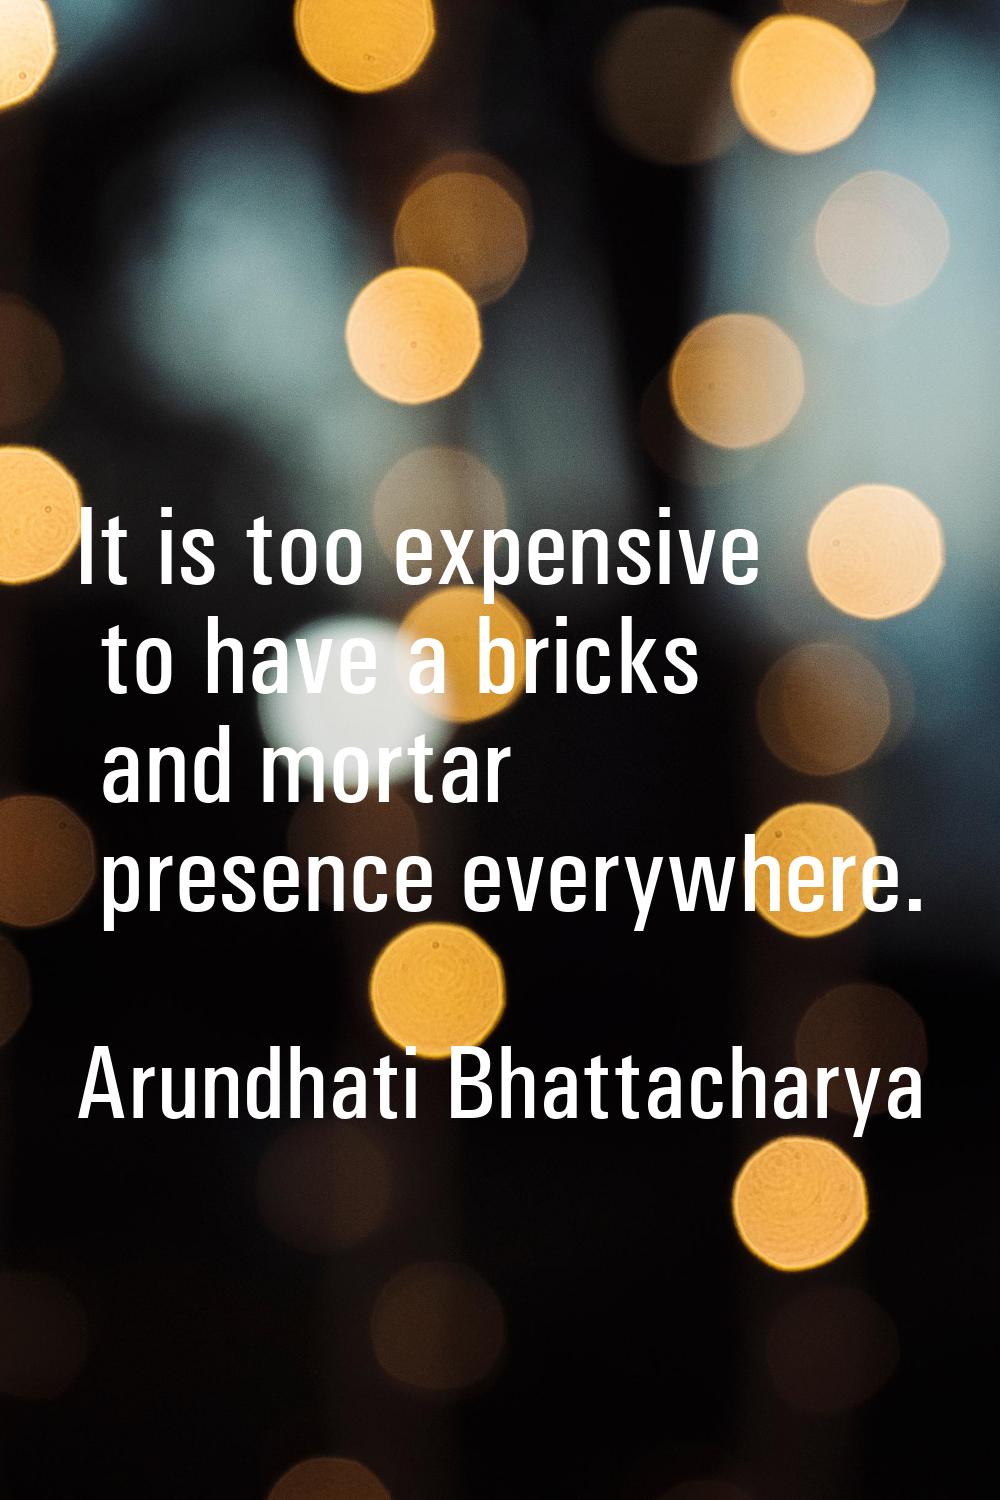 It is too expensive to have a bricks and mortar presence everywhere.